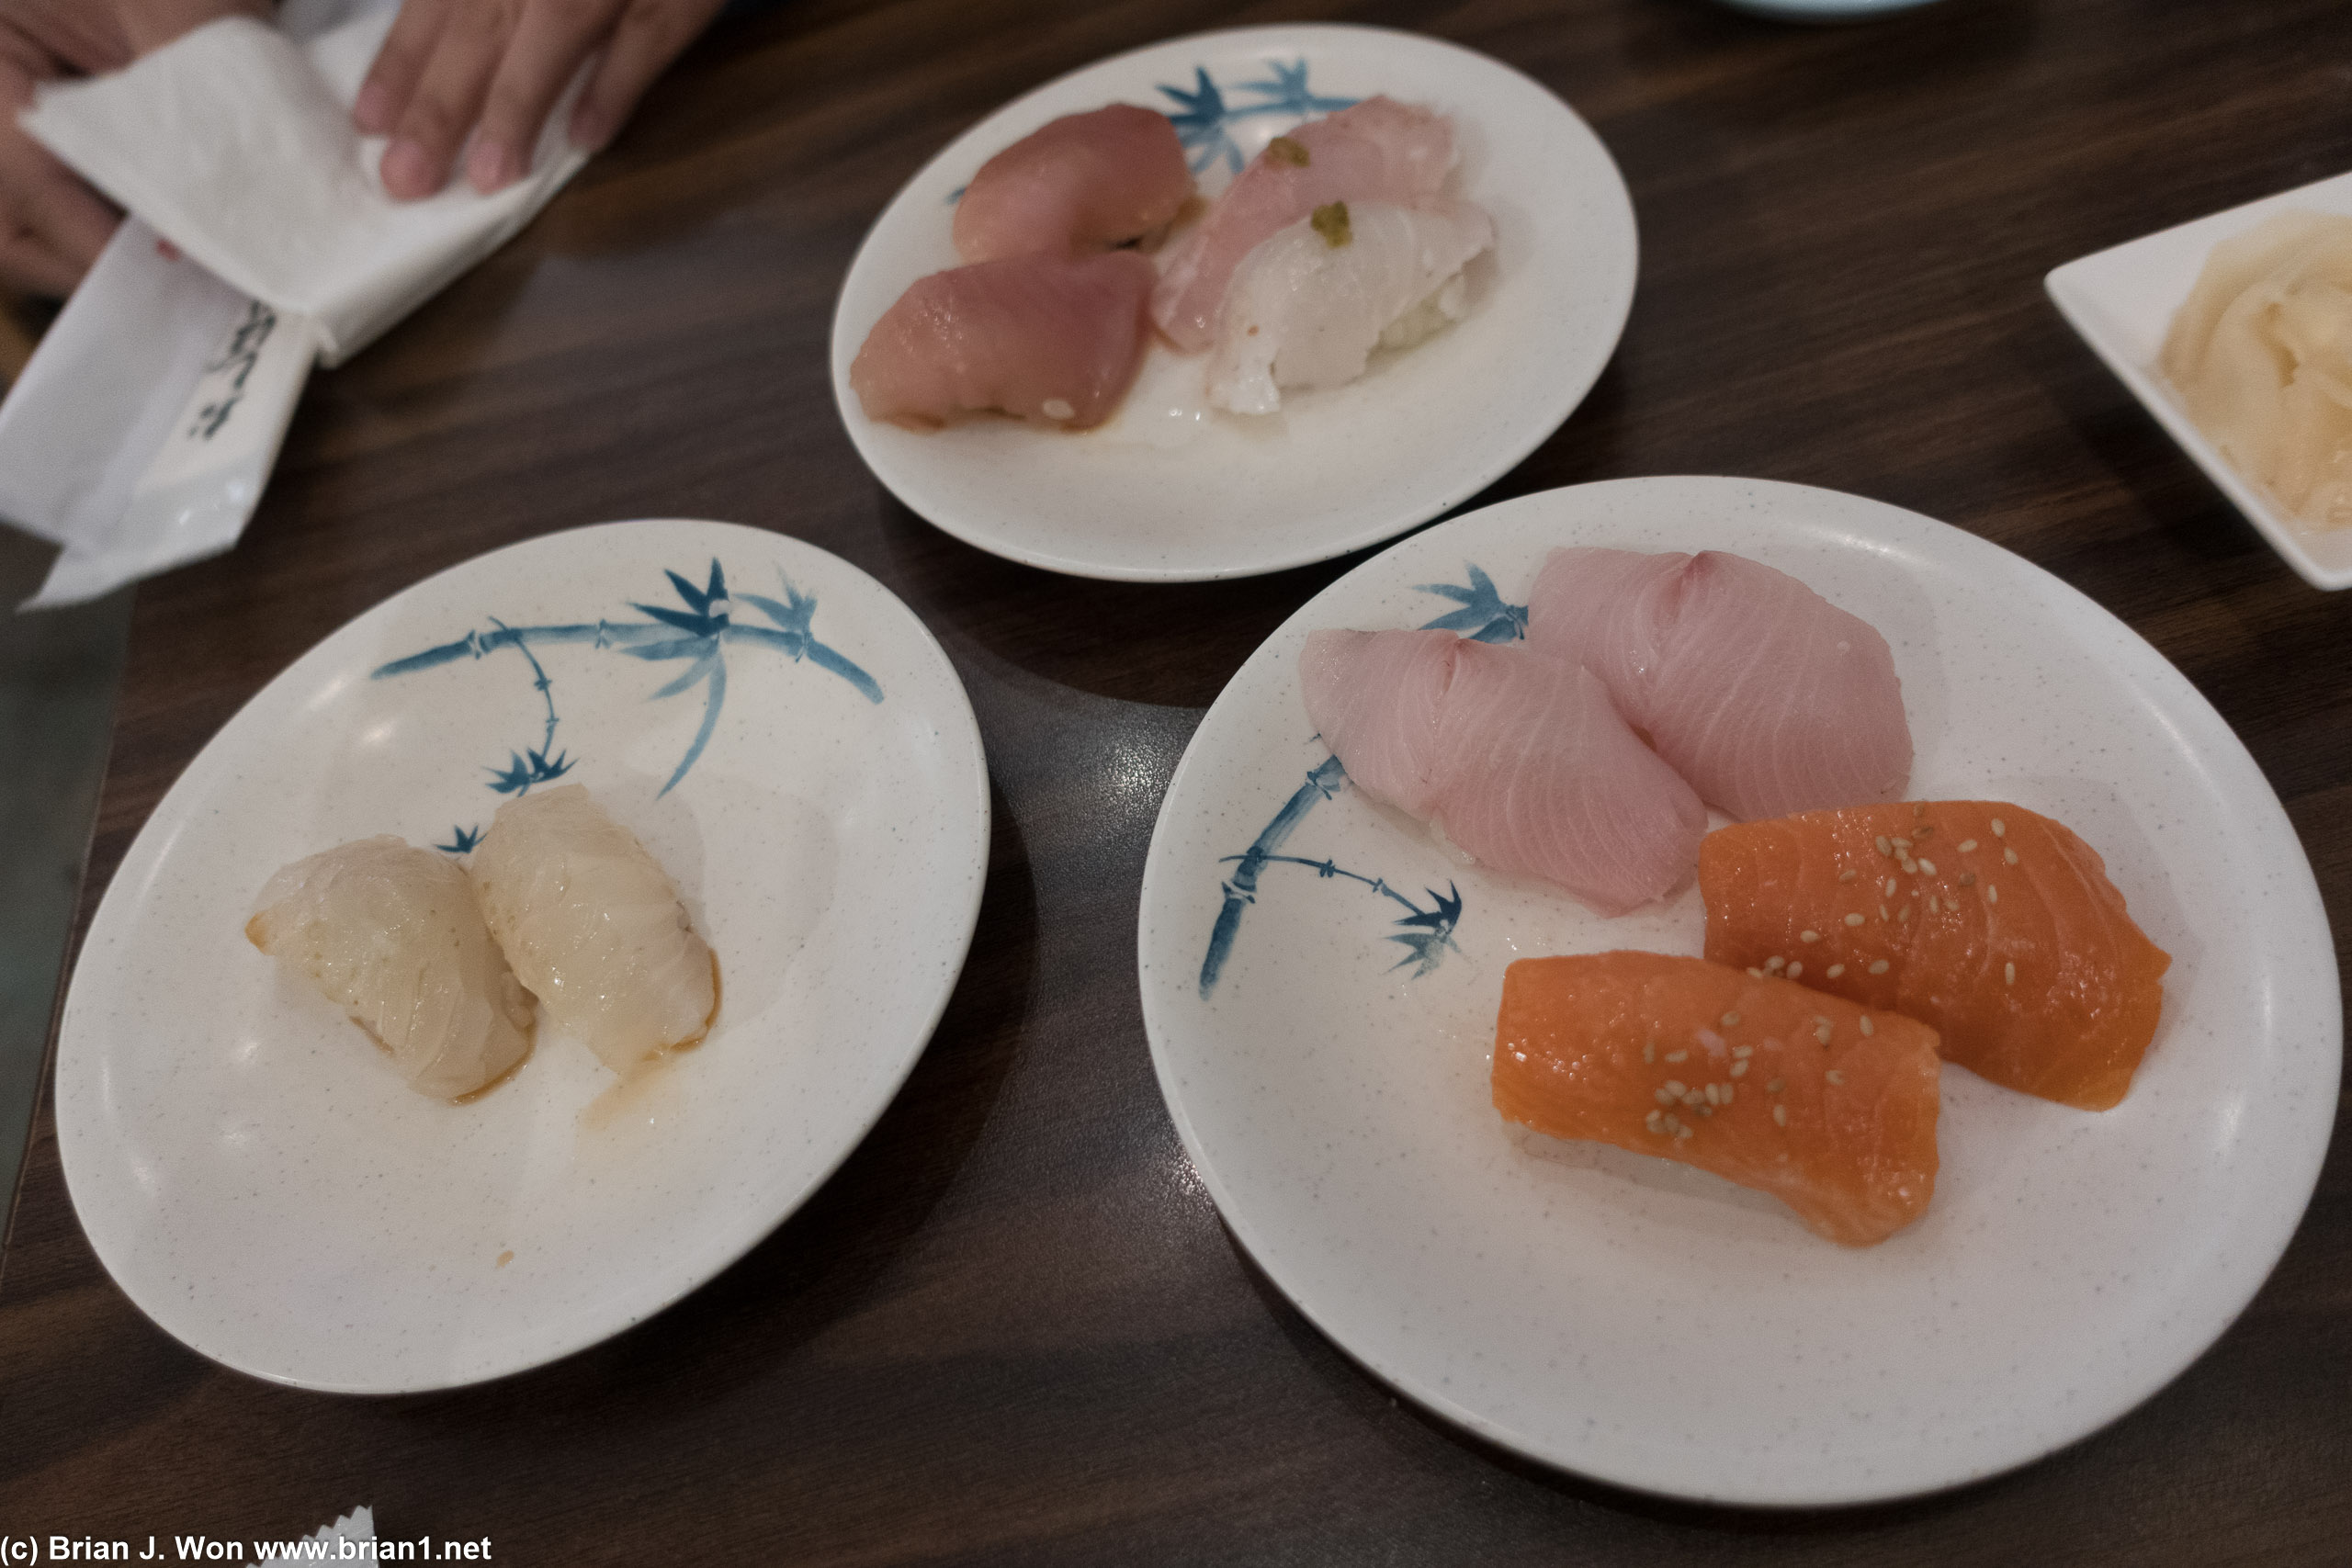 Clockwise from left: halibut, yellowtail, red snapper, albacore, salmon.